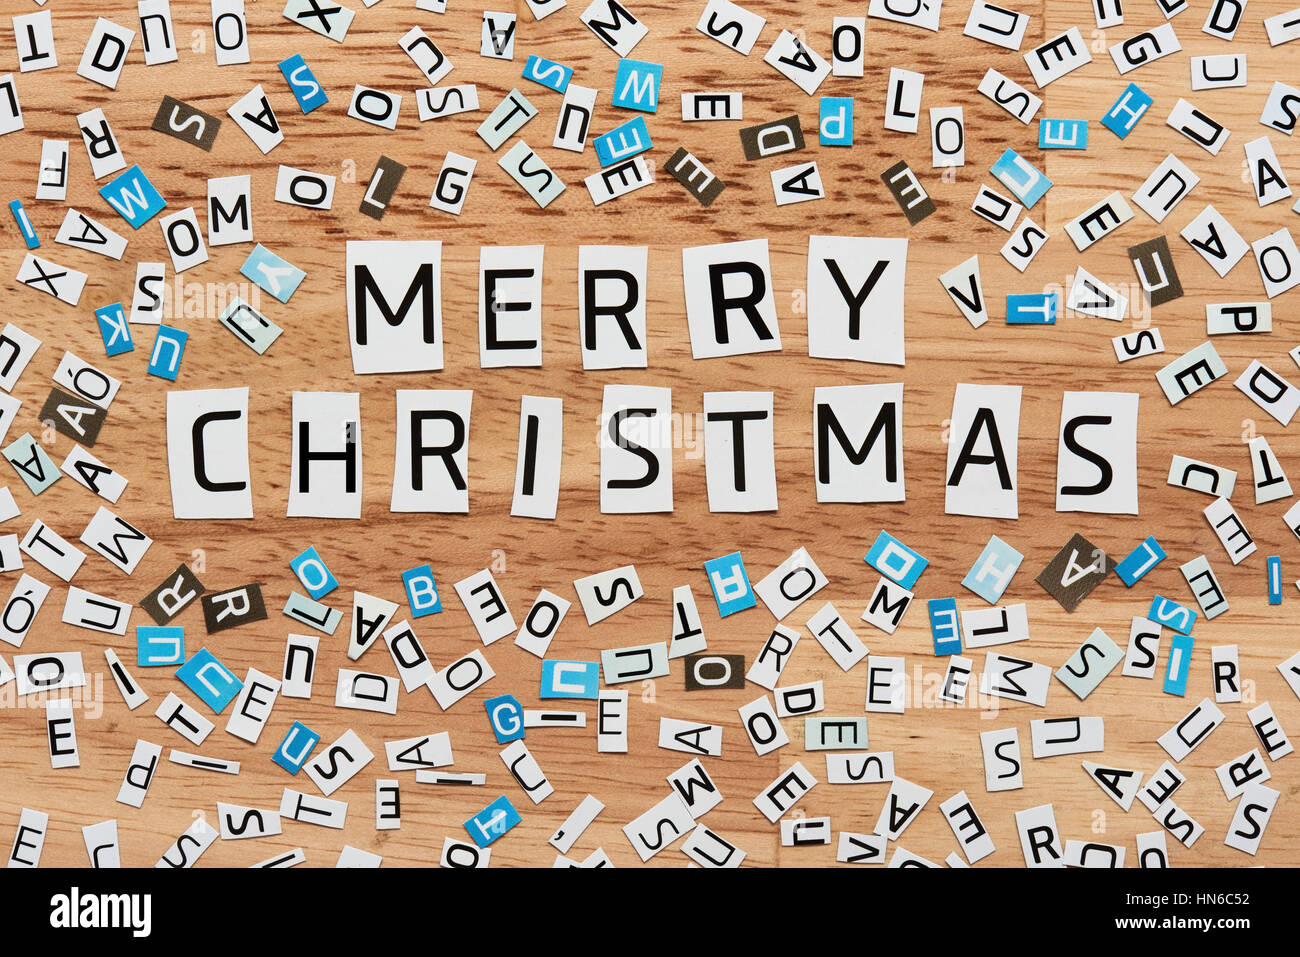 merry cristmas words cut out from magazine on wood Stock Photo